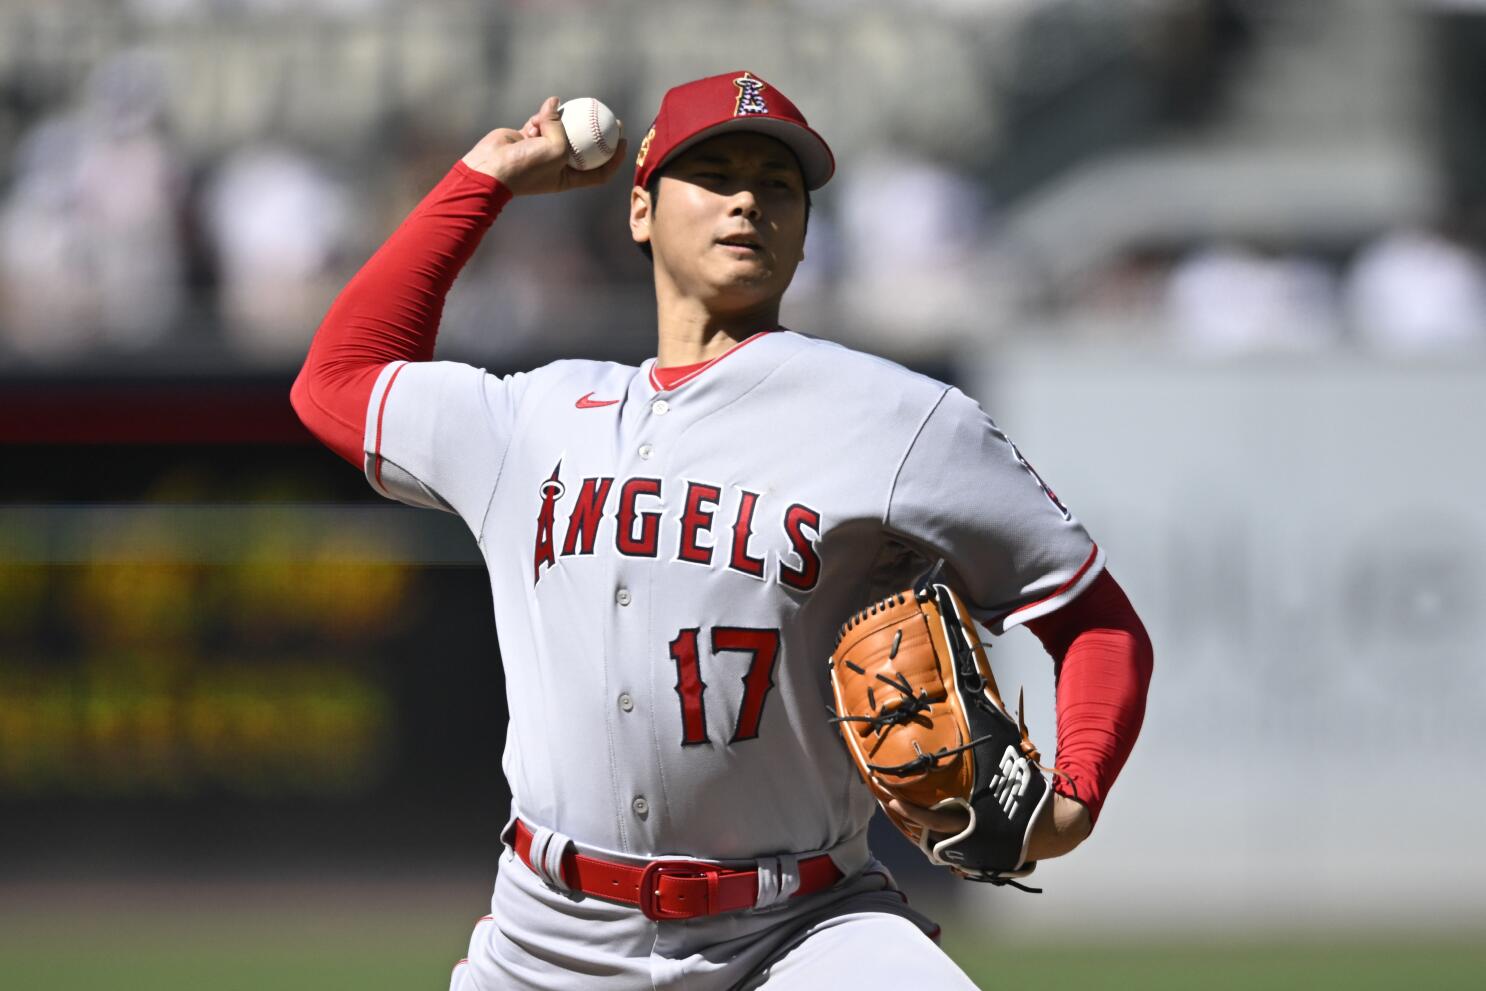 Shohei Ohtani pitches perfect inning, goes 0-for-2 in All-Star Game